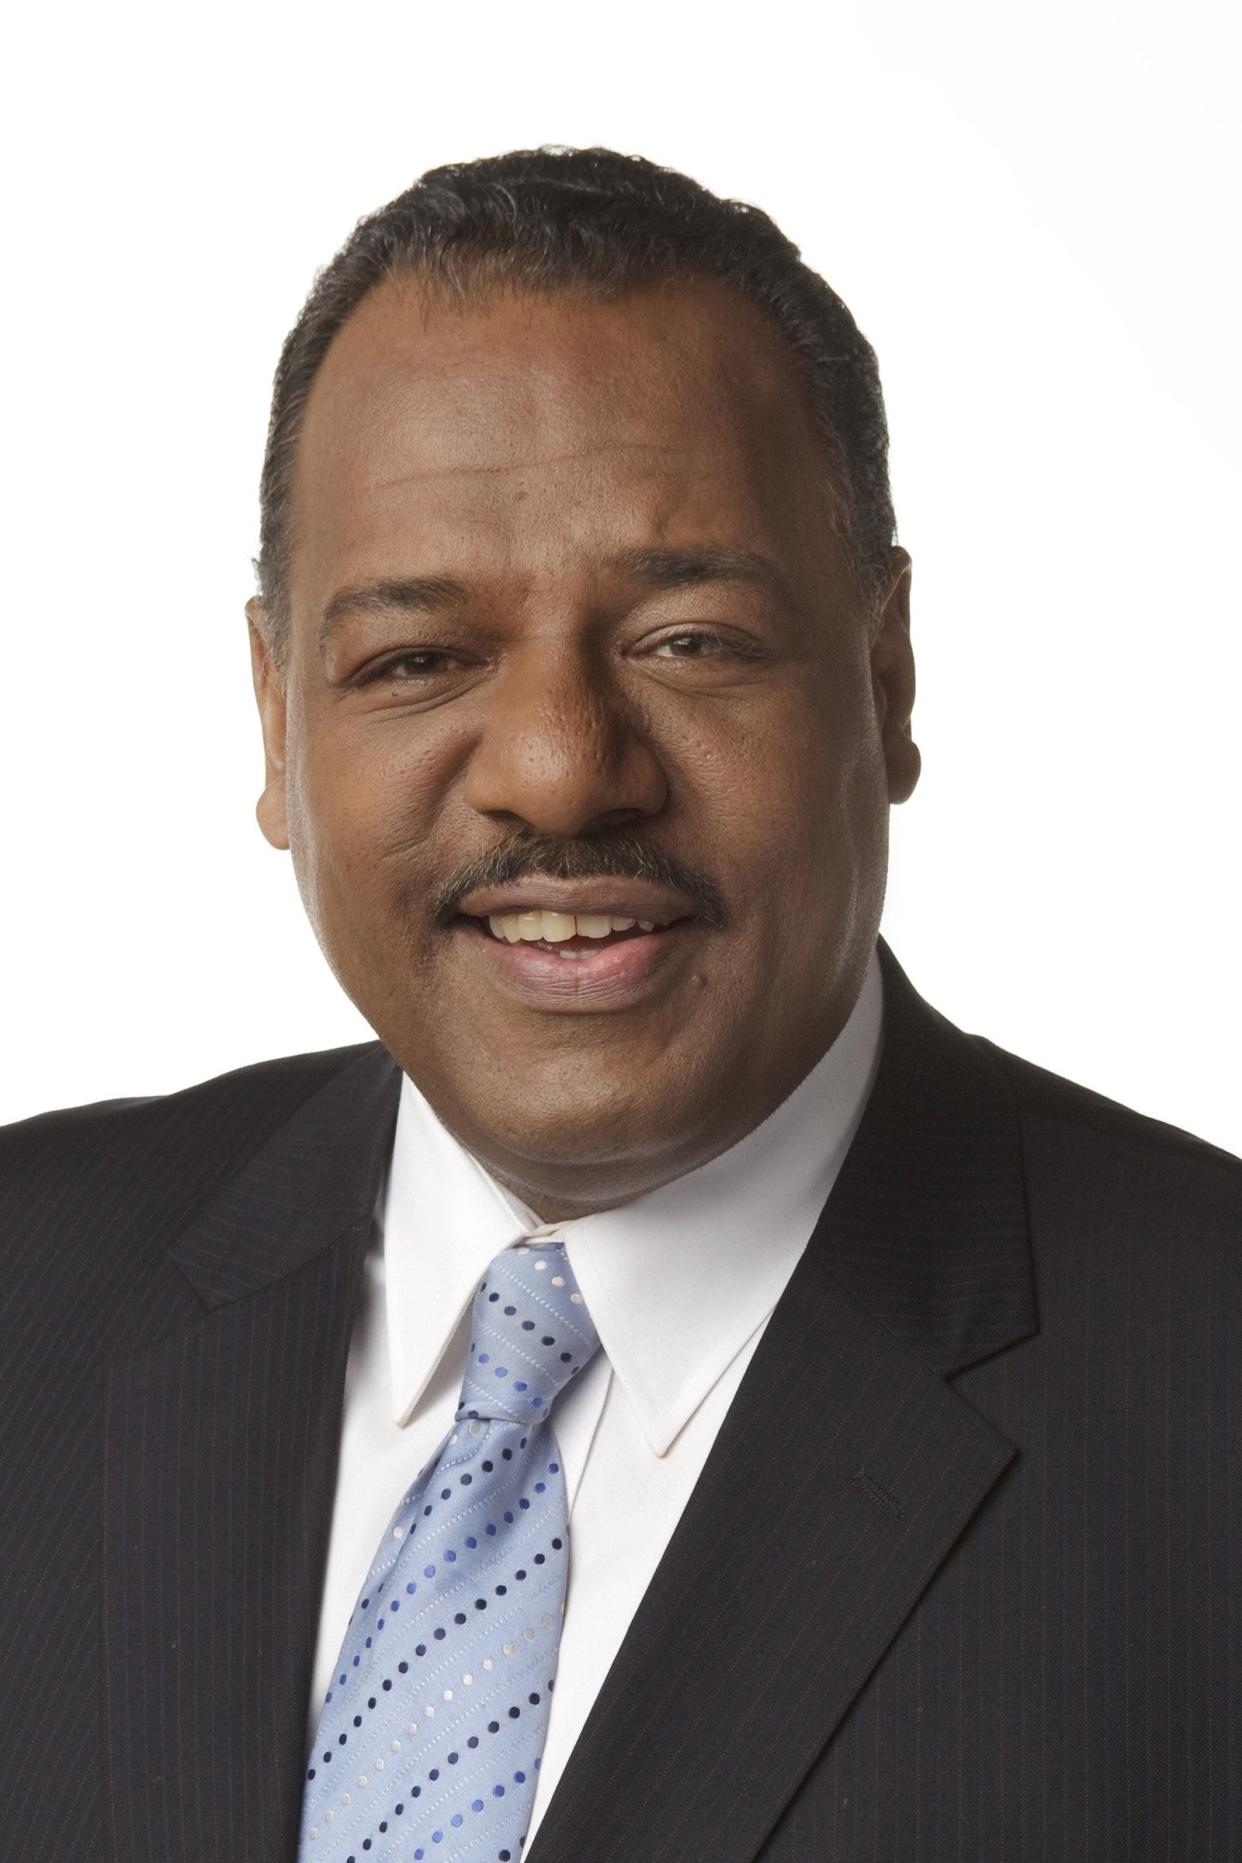 WCMH-TV (Channel 4) news anchorman Mike Jackson, who suffered a stroke in died in 2023